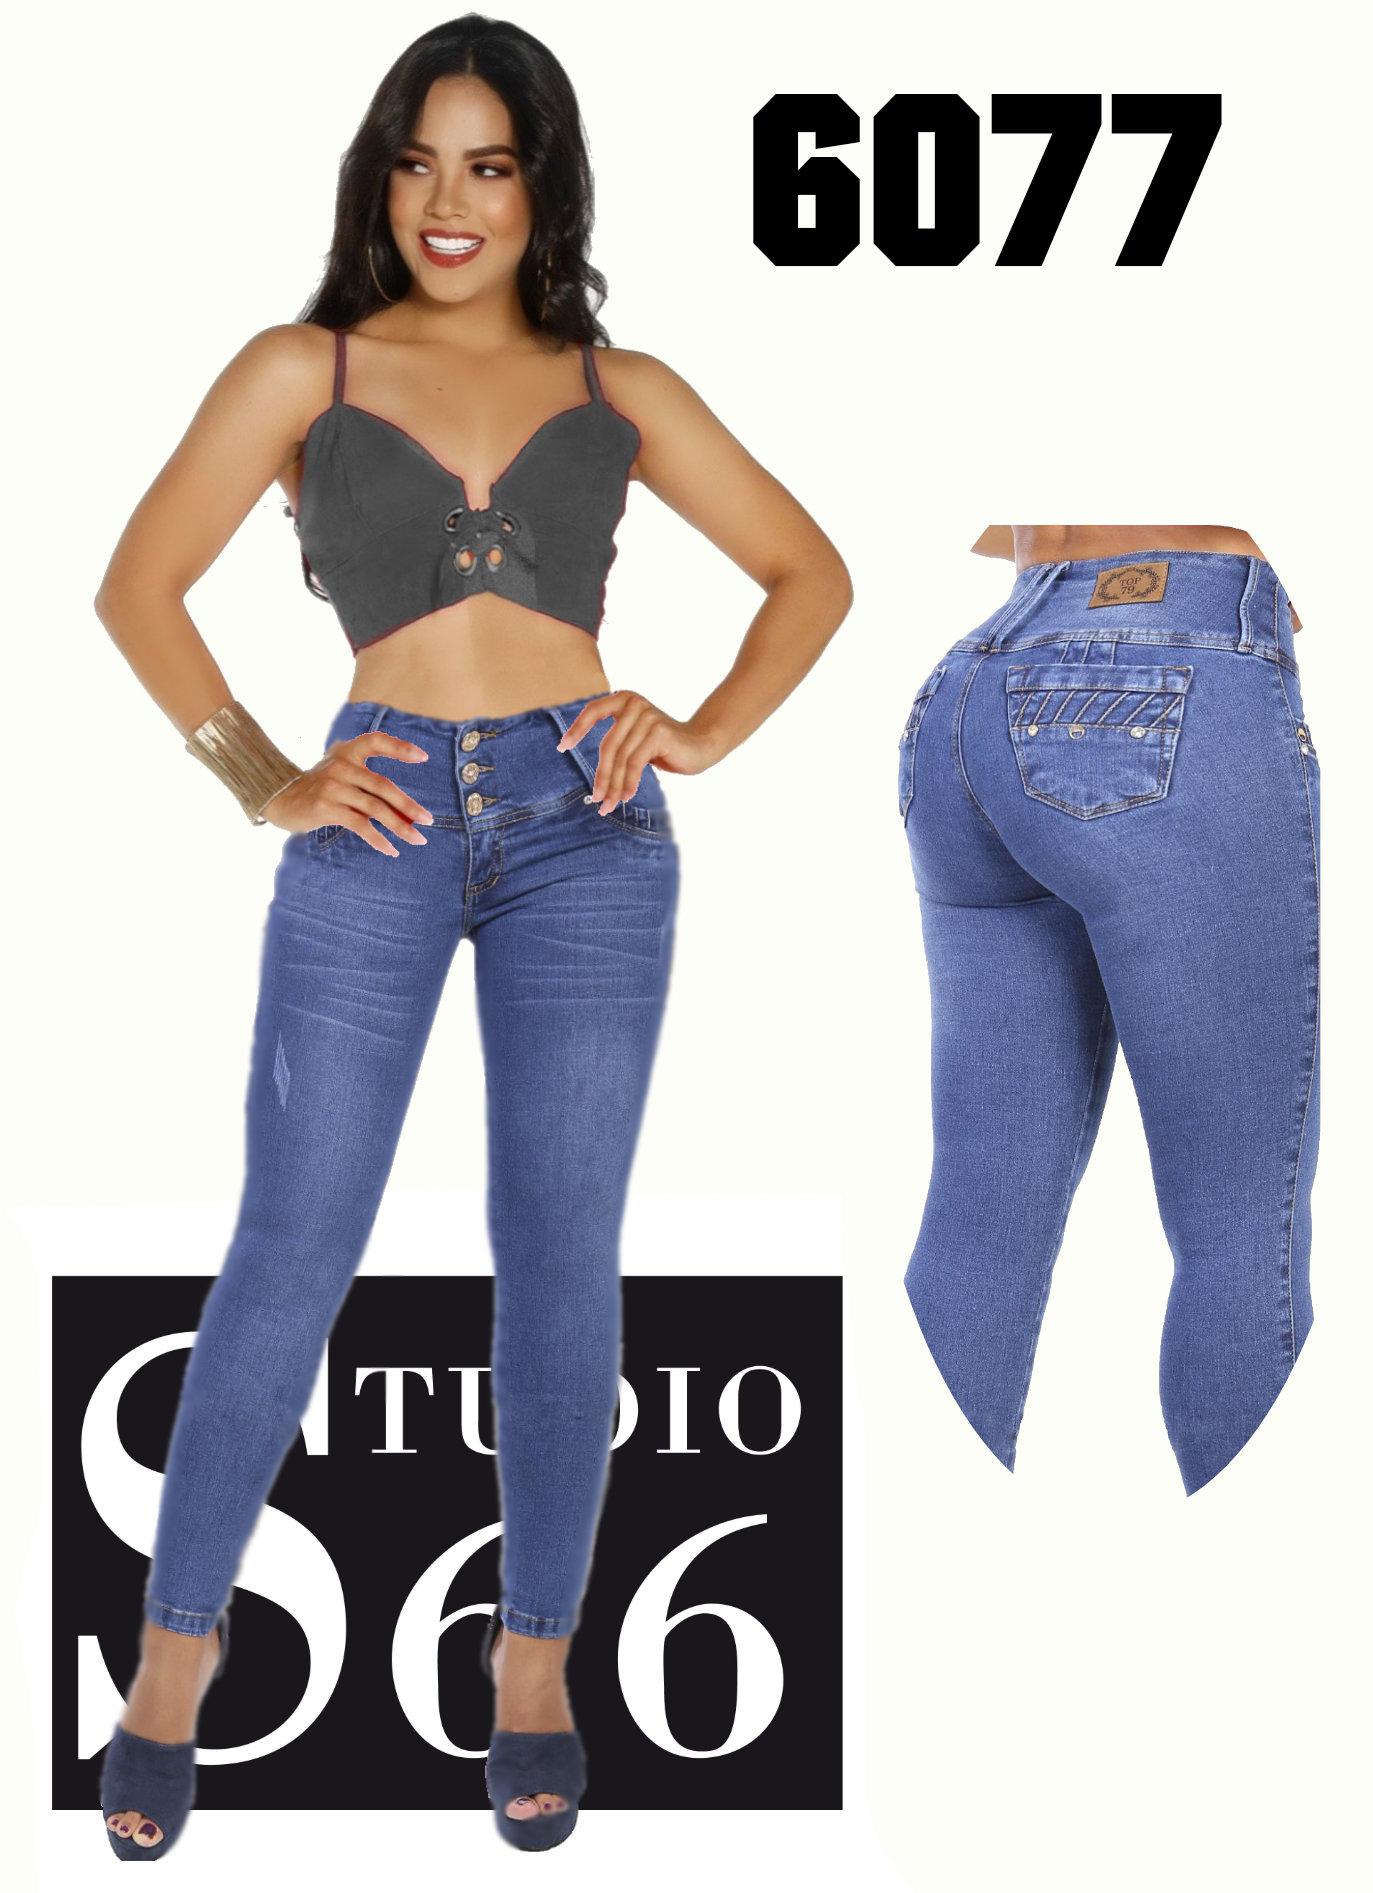 Jhonier Moda colombiana on X: Moda latina jeans Push-Up #modalatina  #modacolombiana #moda #modafeminina #pushup #jeans #style #lifestyle #party   / X